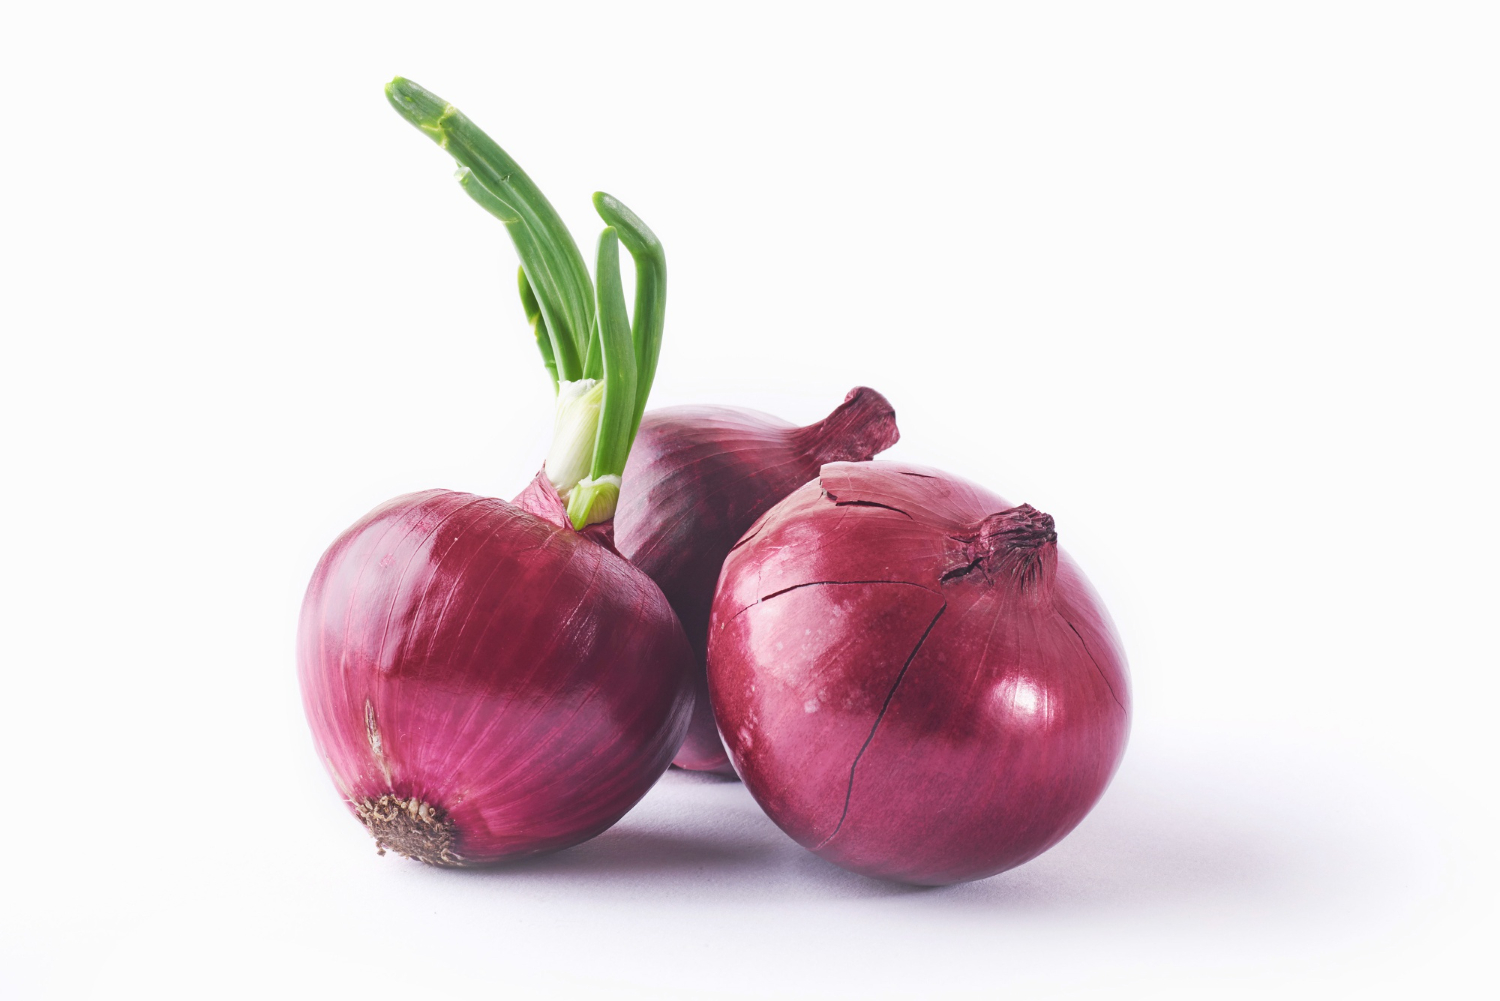 Onions: Nutrition, Health Benefits, and Precautions